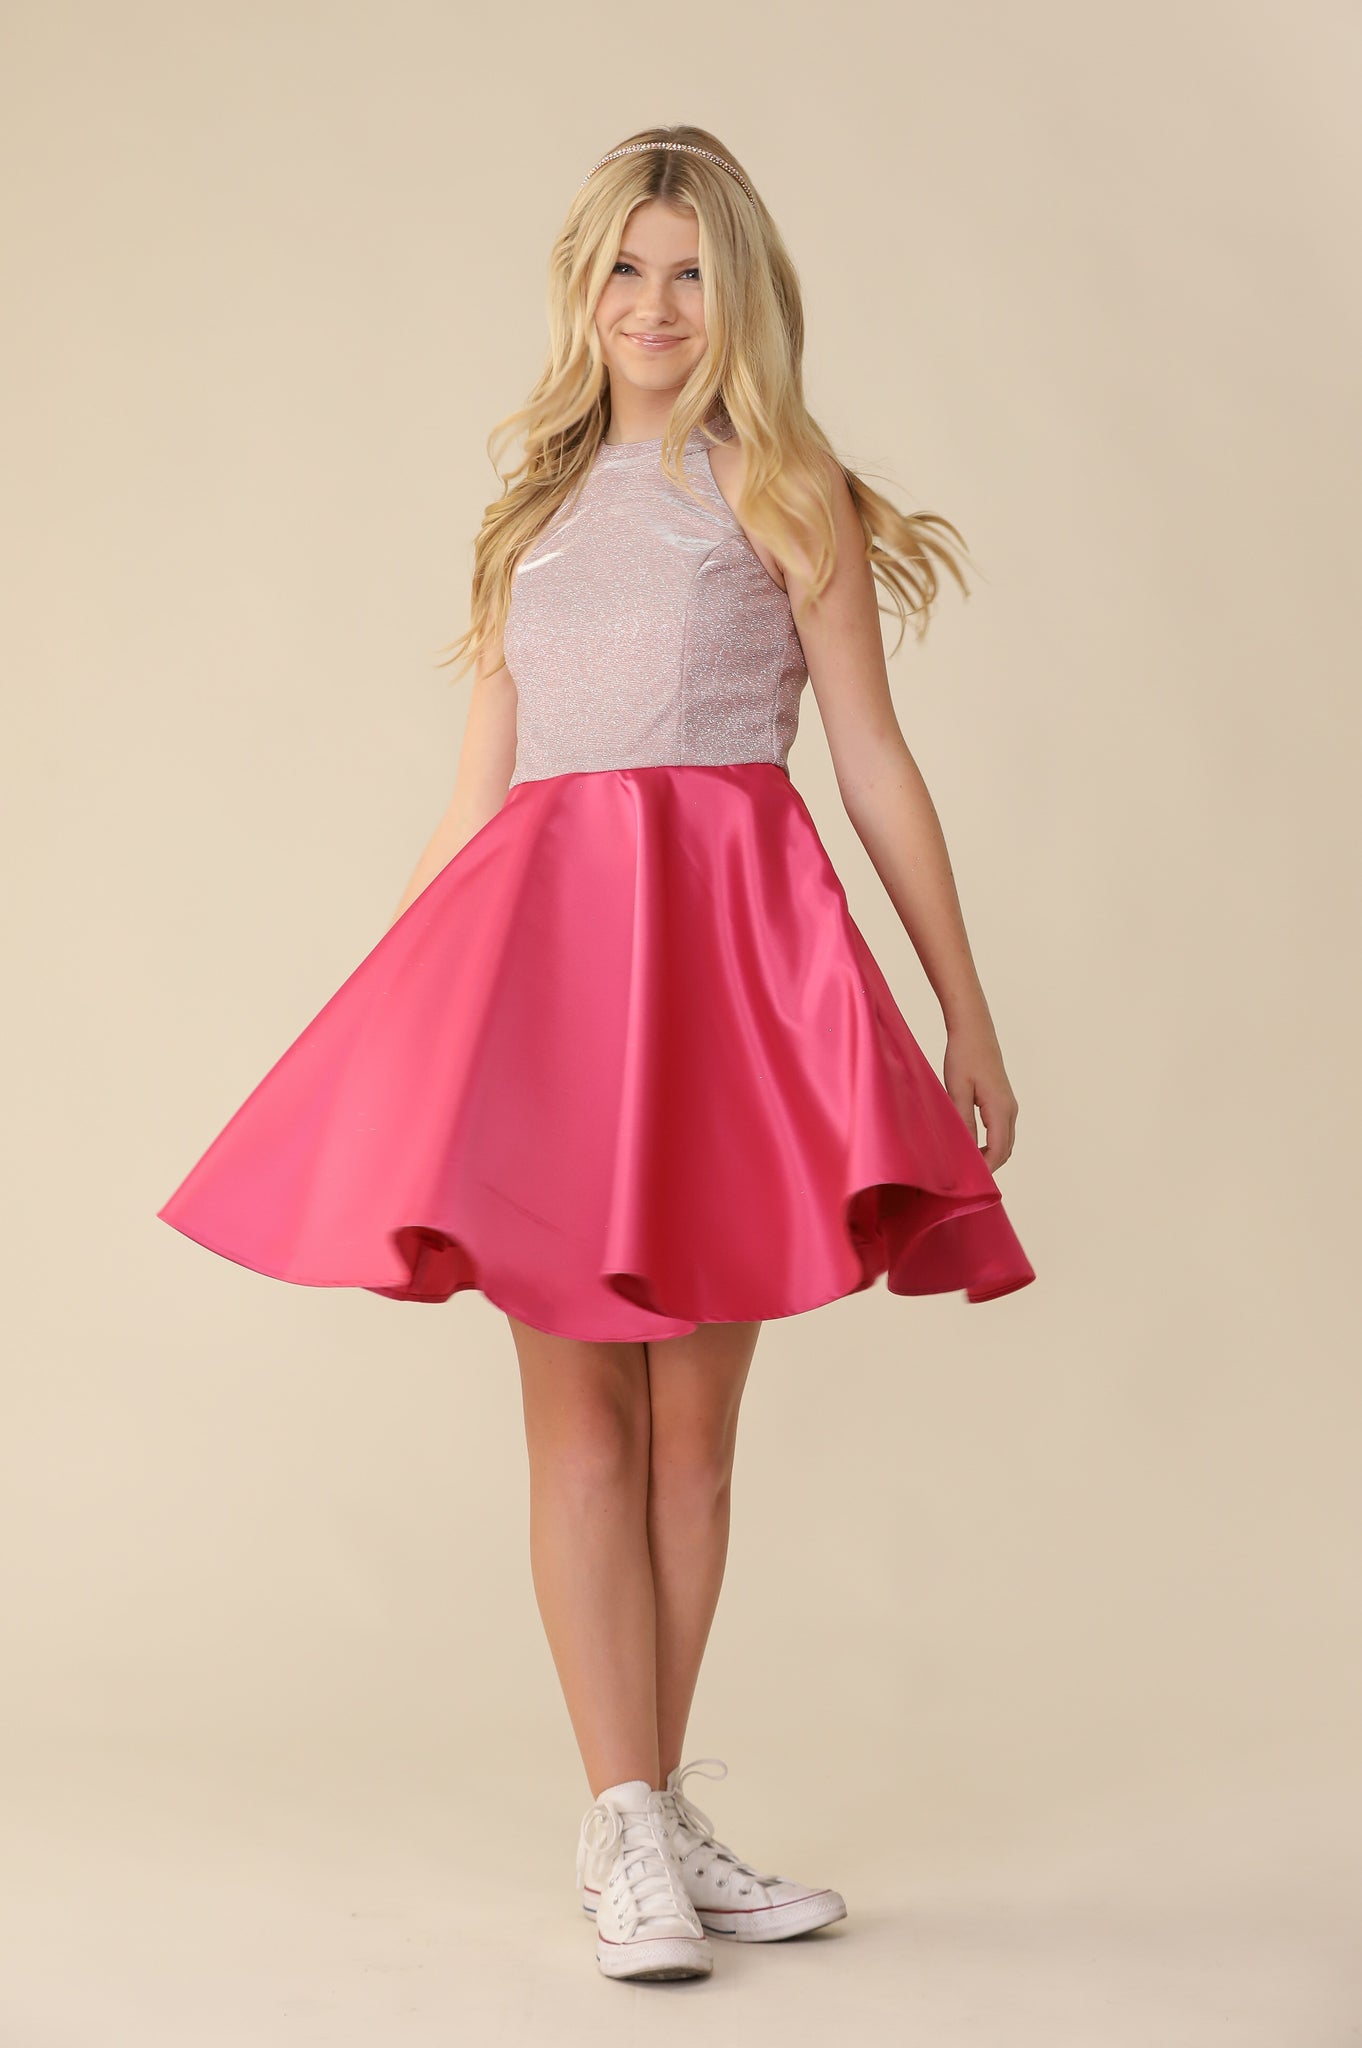 Halter style fit and flare dress with a stretchy, glitter bodice and non-stretch satin skirt in fuchsia pink with sneaker. 